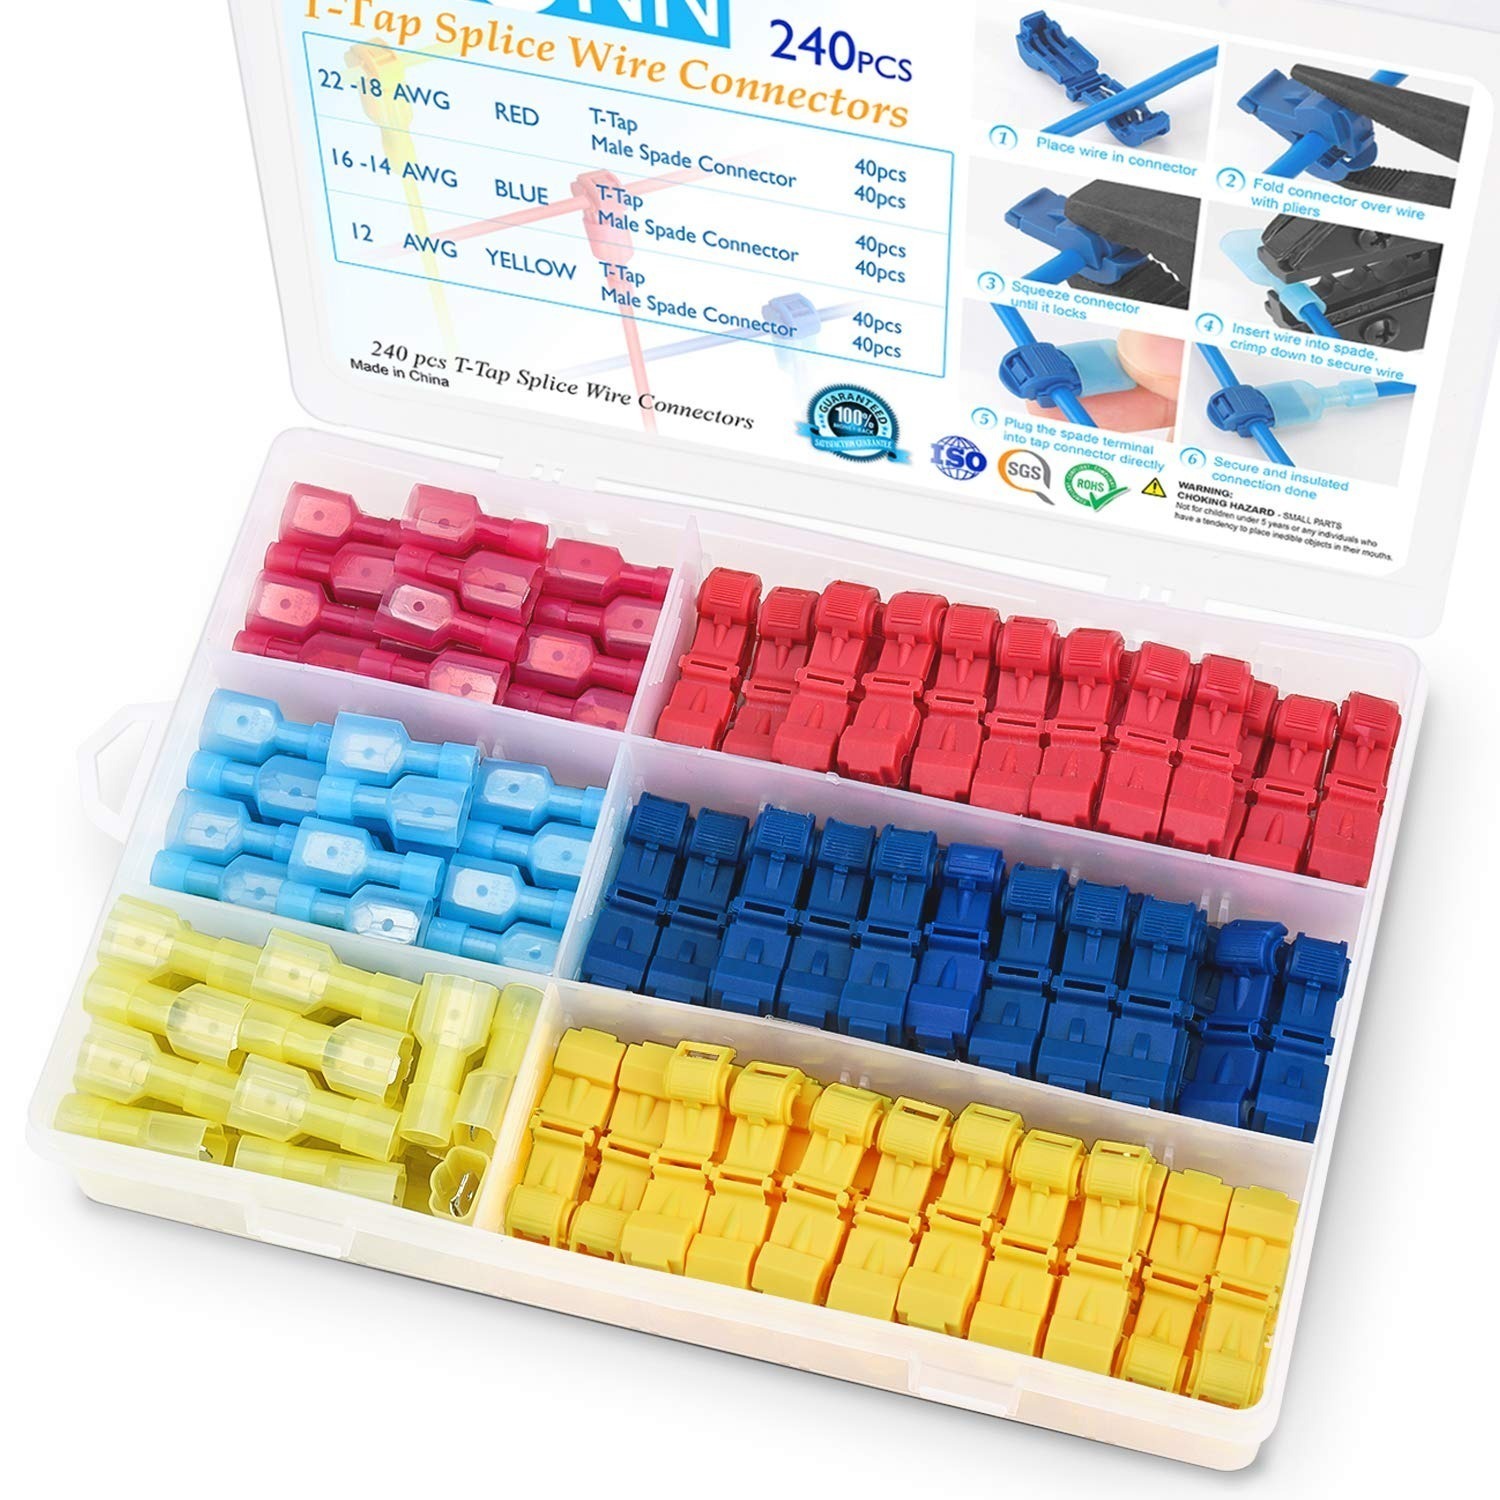 TICONN Self Stripping Electrical T-Tap Wire Connectors: 120-Pc $4.67, 240-Pc $7.14 & More + Free Shipping w/ Prime or on Orders $35+